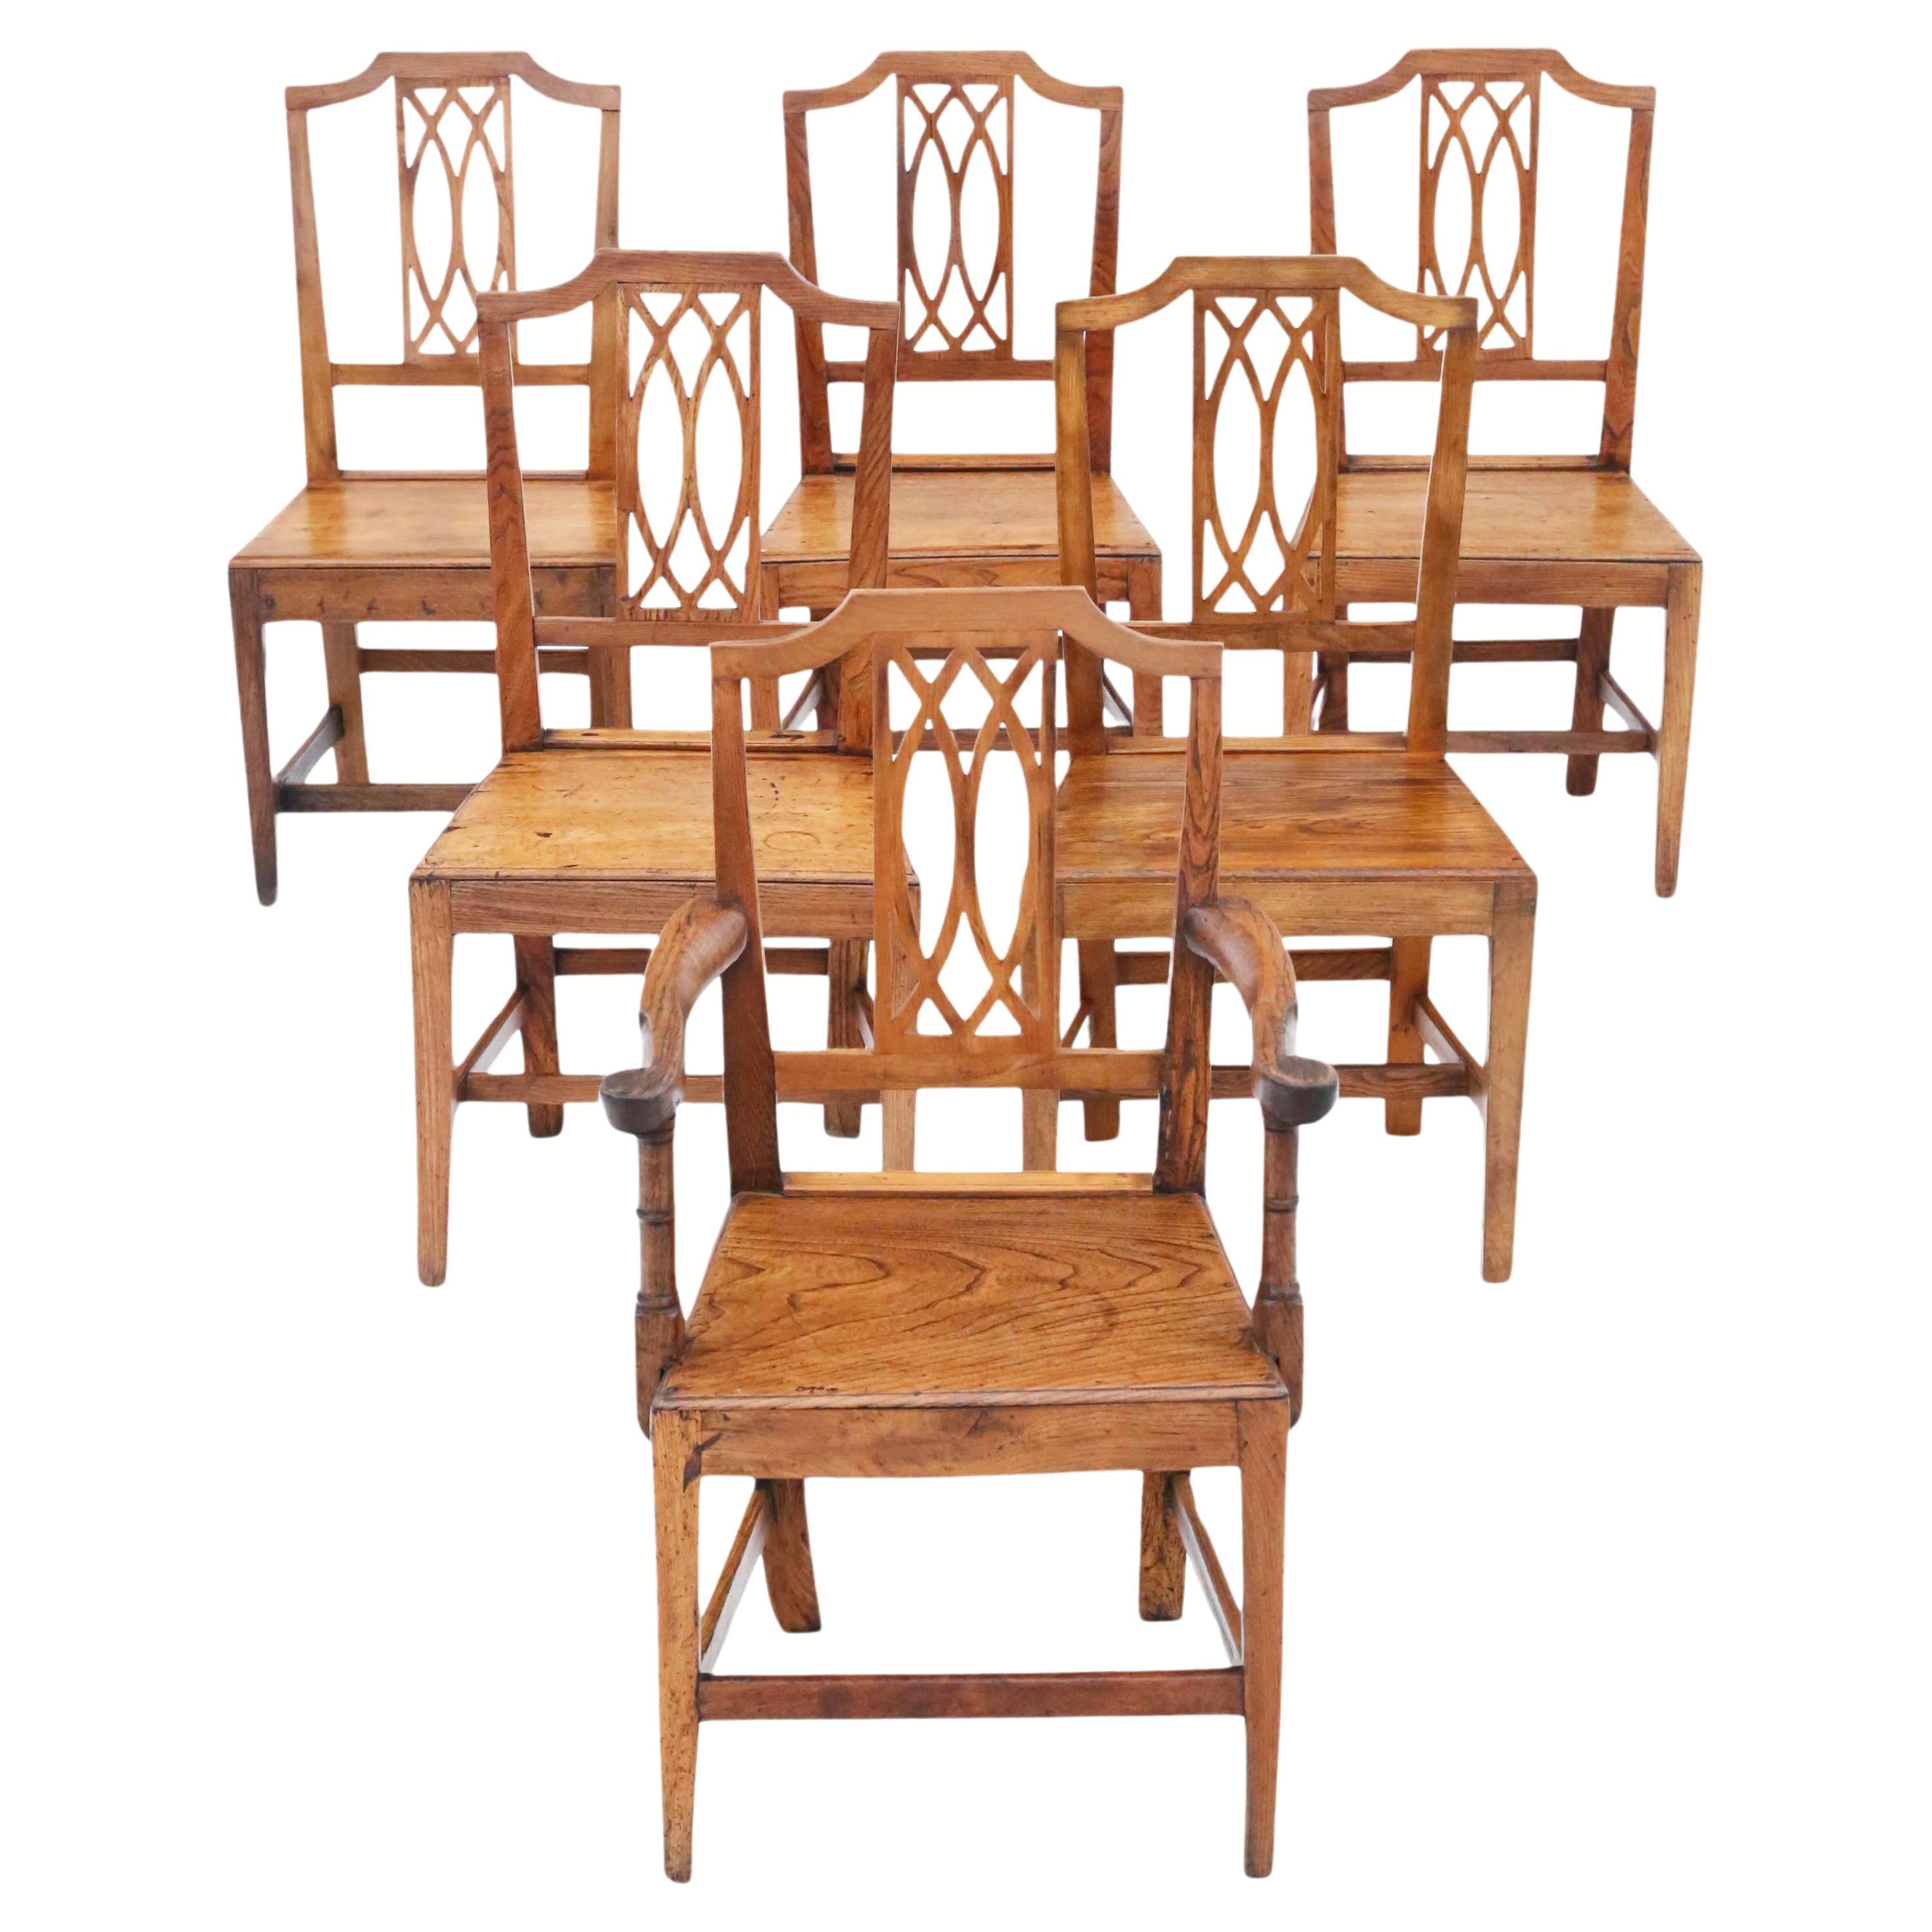 19th Century Elm Kitchen Dining Chairs: Set of 6 (5+1), Antique Quality For Sale